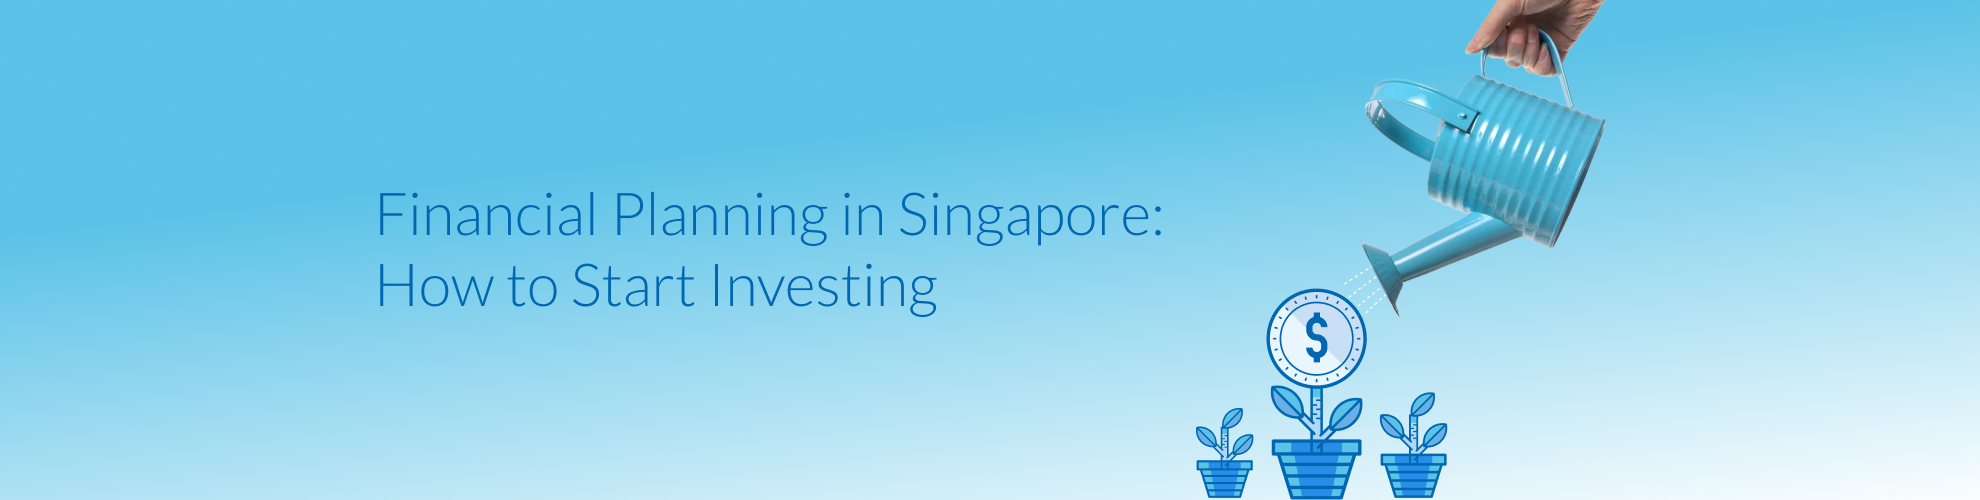 Financial Planning Singapore by RHB